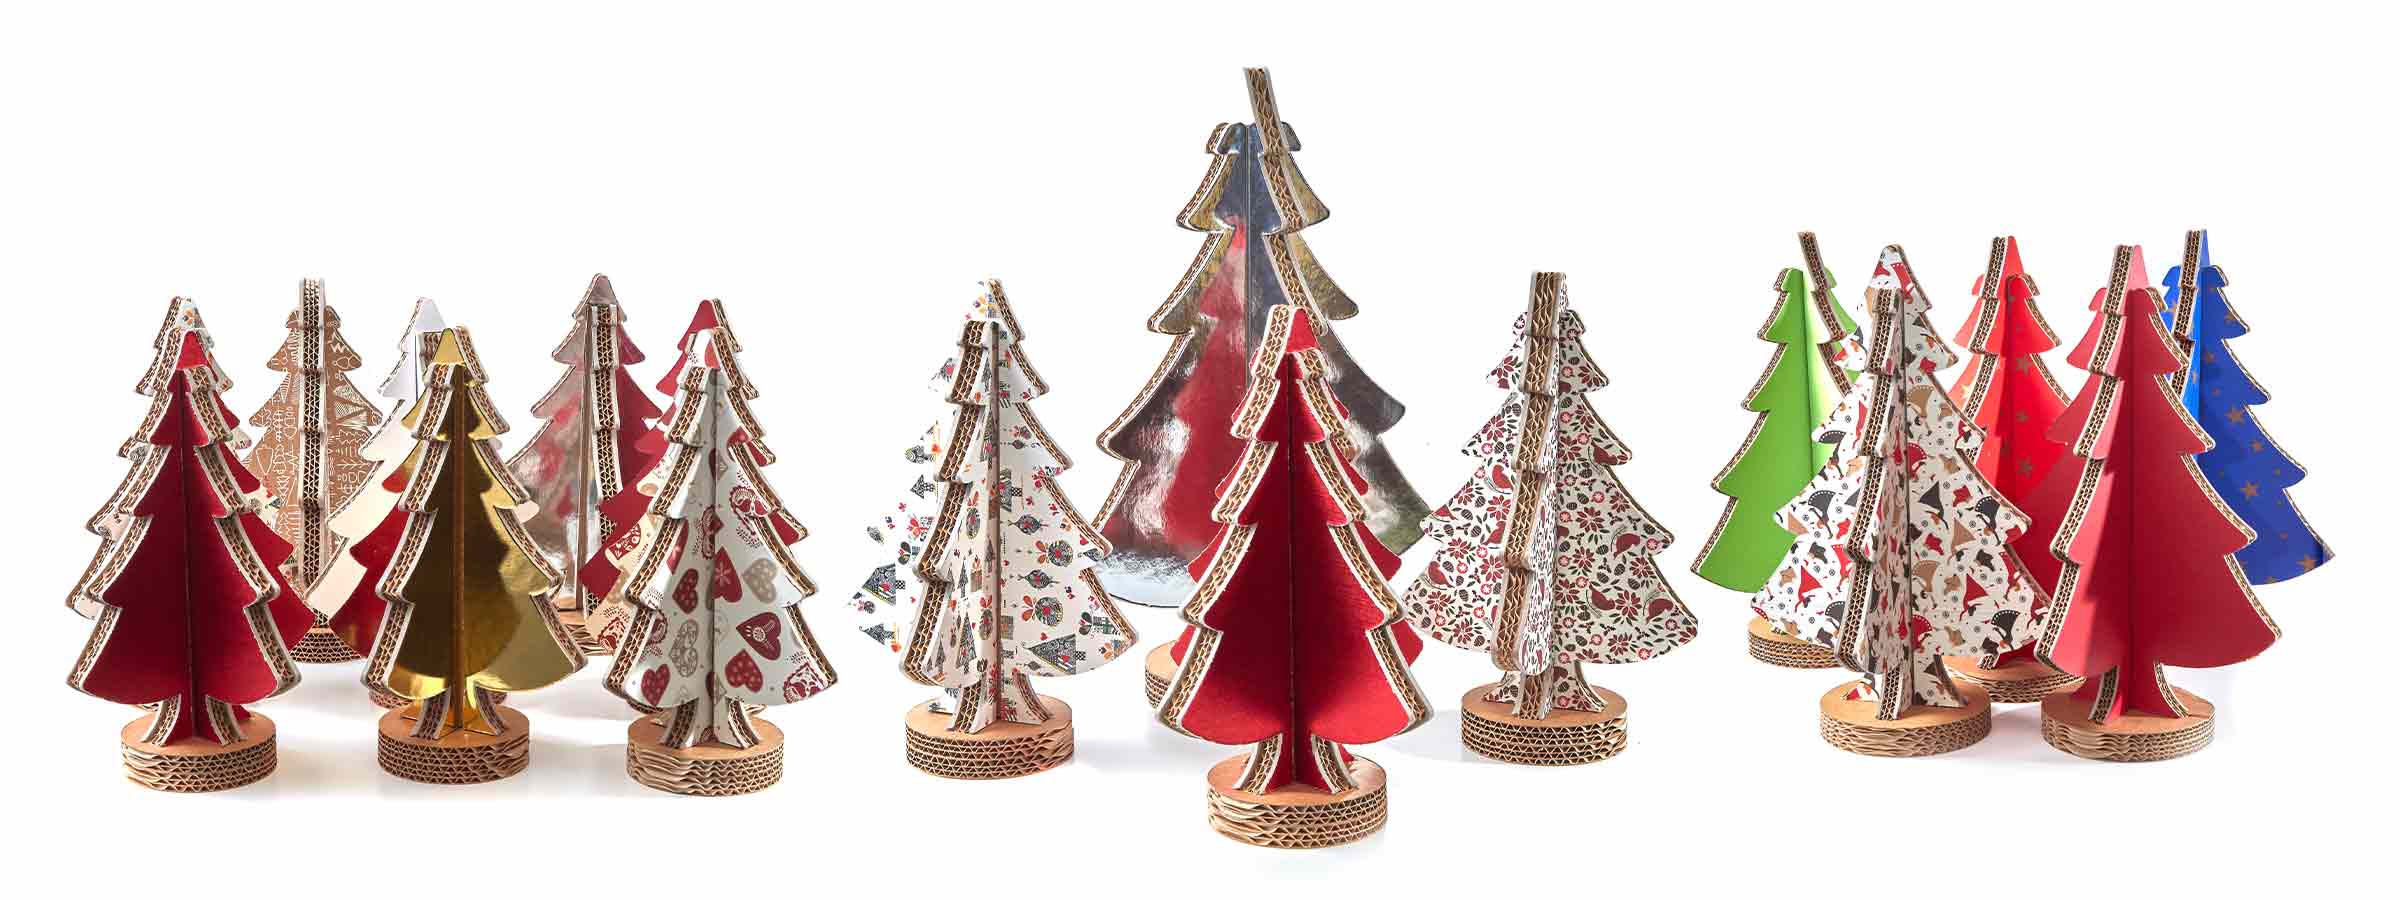 Sustainable Christmas Trees - Design Italy